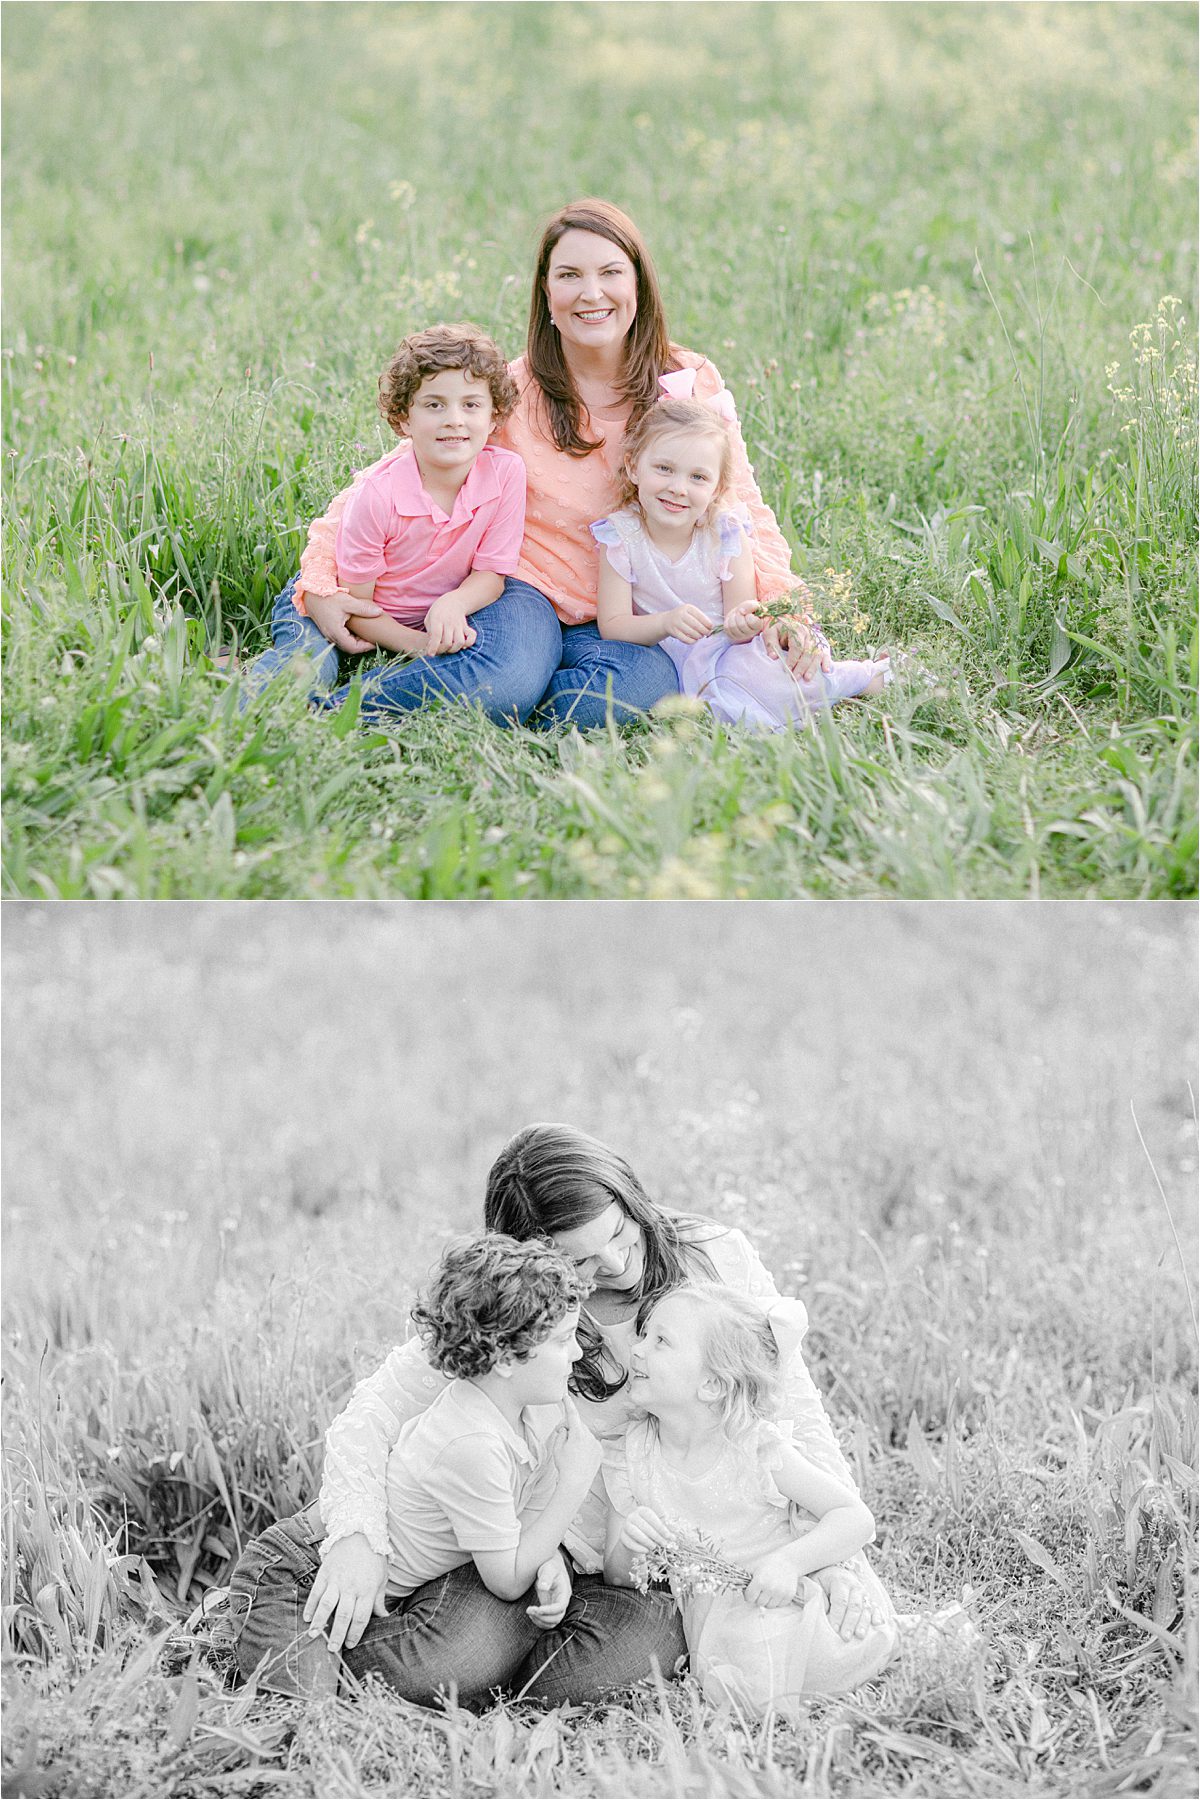 Athens, GA spring family pictures of a mom with her children in a field with wildflowers.